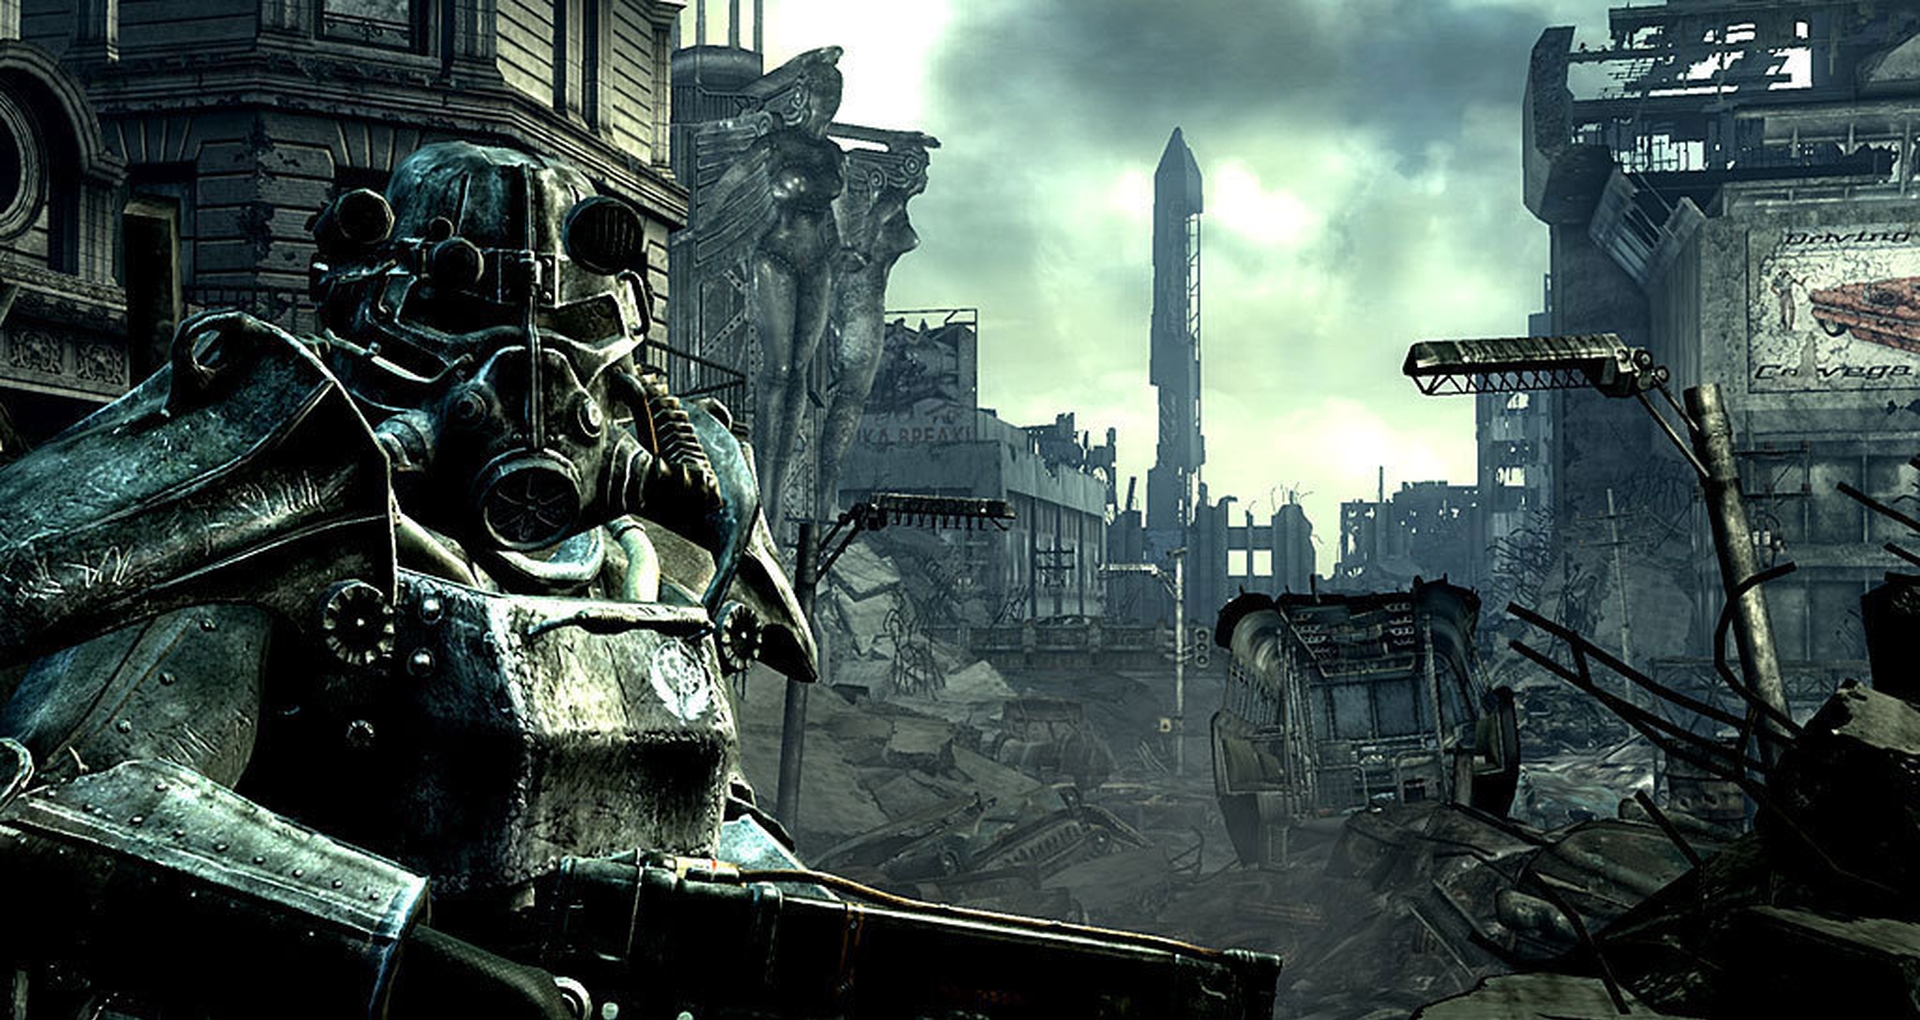 Although it is an old game, Bethesda's first take on the Fallout series is still played and players are dealing with Fallout 3 failed to initialize renderer,...